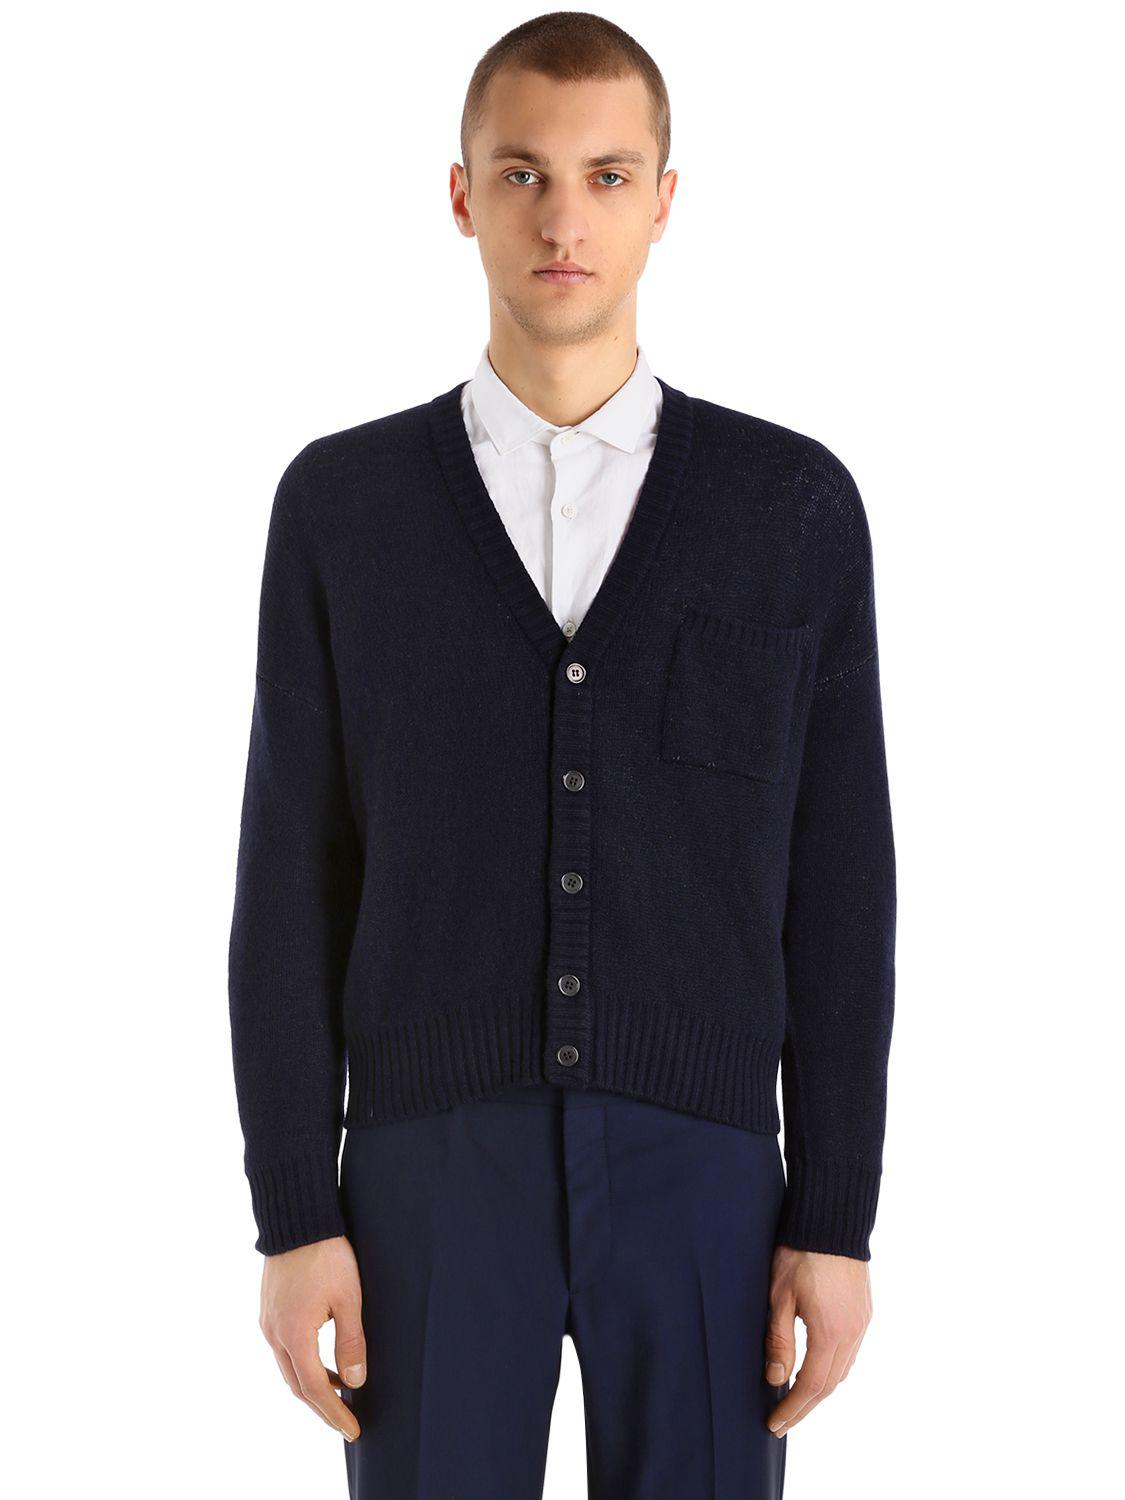 Lyst - Prada Double Cashmere Knit Cardigan in Blue for Men